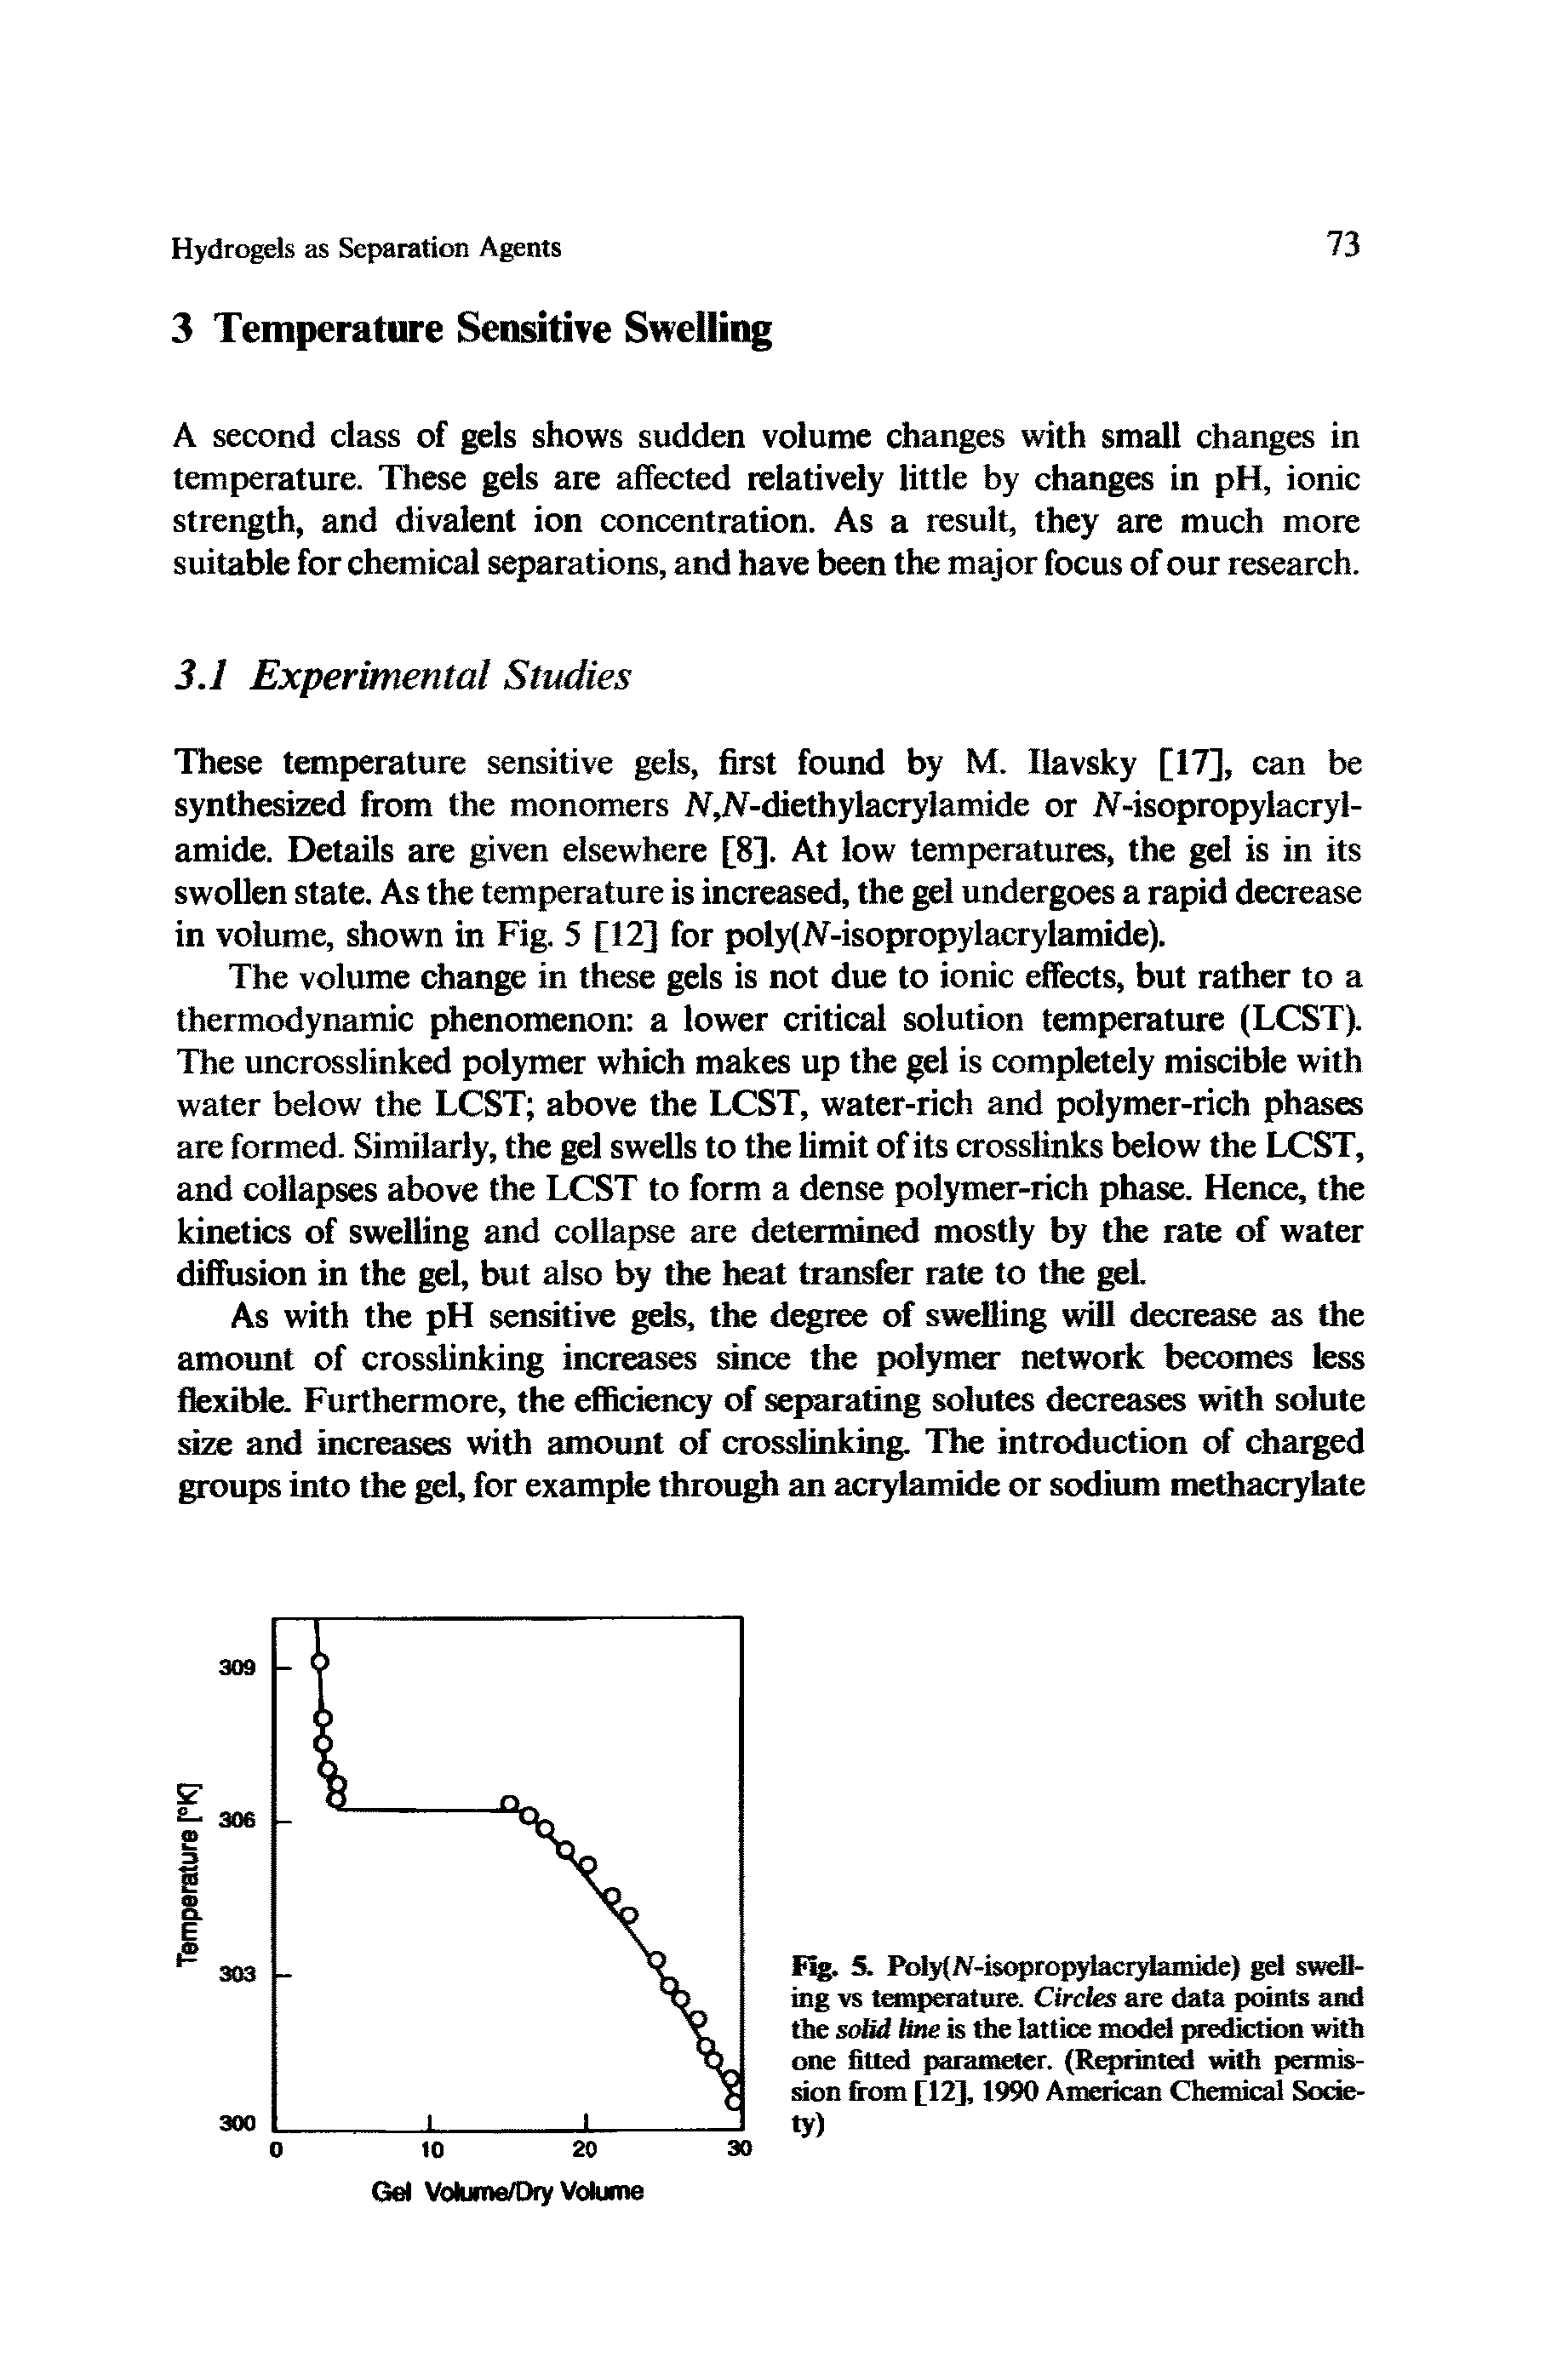 Fig. 5. Poly(A-isopropylacrylamide) gel swelling vs temperature. Circles are data points amt the solid fine is the lattice model prediction with one fitted parameter. (Reprinted with permission from [12], 1990 American Chemical Society)...